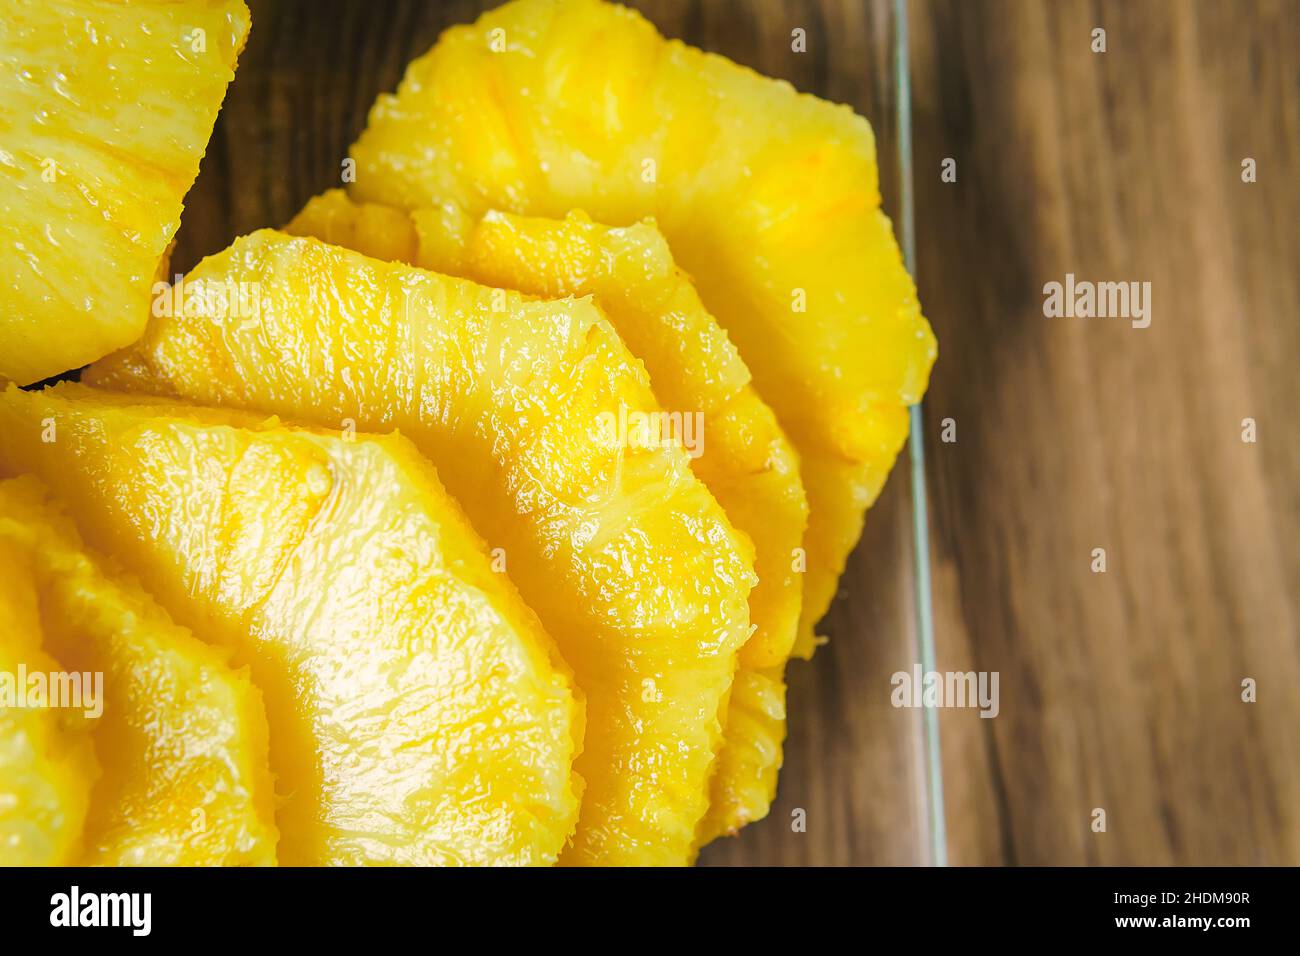 Close-up of a young woman's hands cutting a juicy pineapple with a chef's knife on a wooden table in a kitchen. Stock Photo